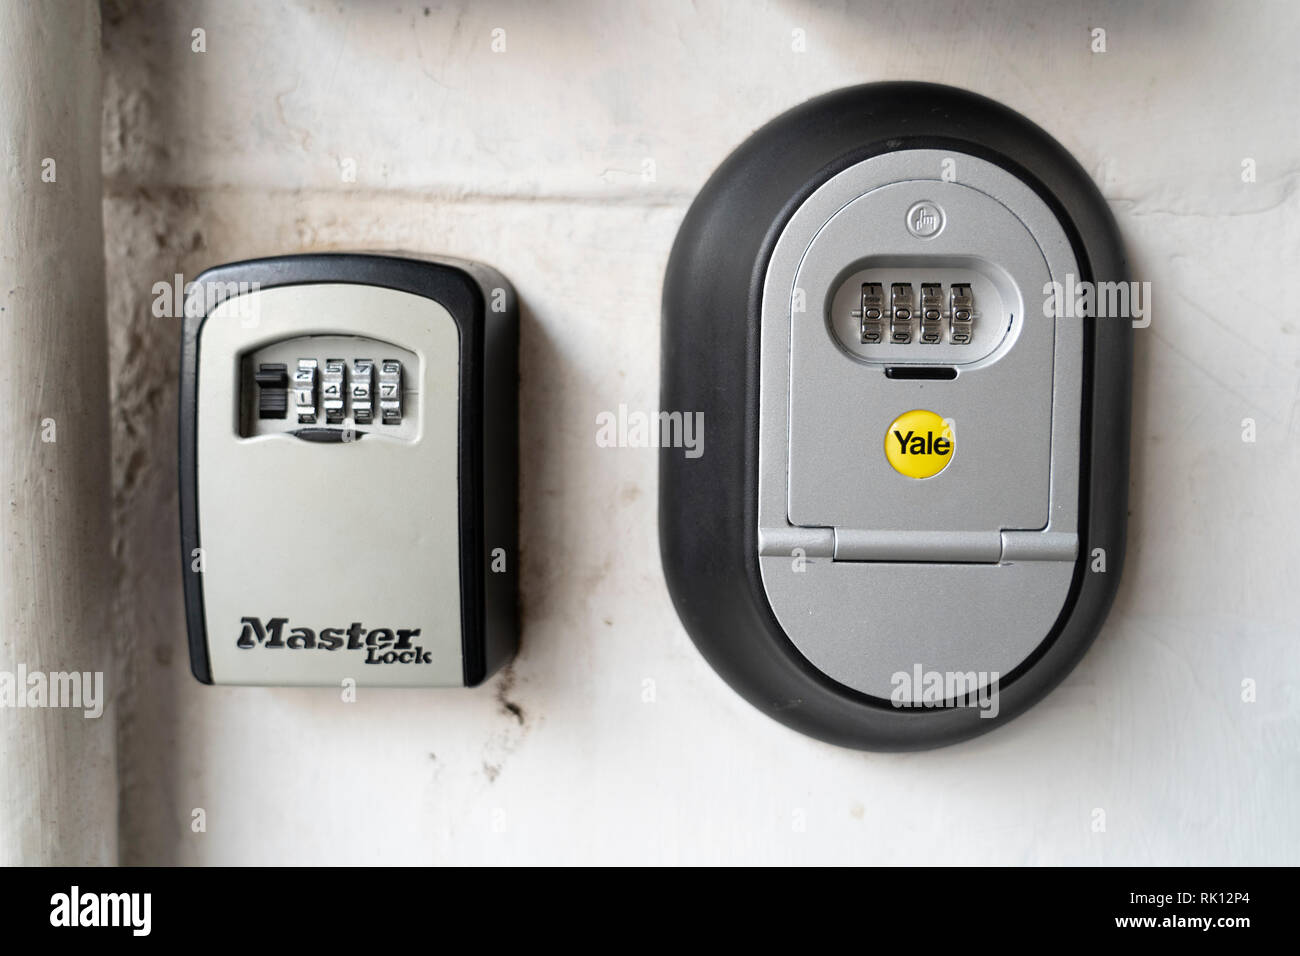 Key boxes for AirbnB guests to access door keys outside apartment building in Edinburgh Old Town, Scotland, UK Stock Photo